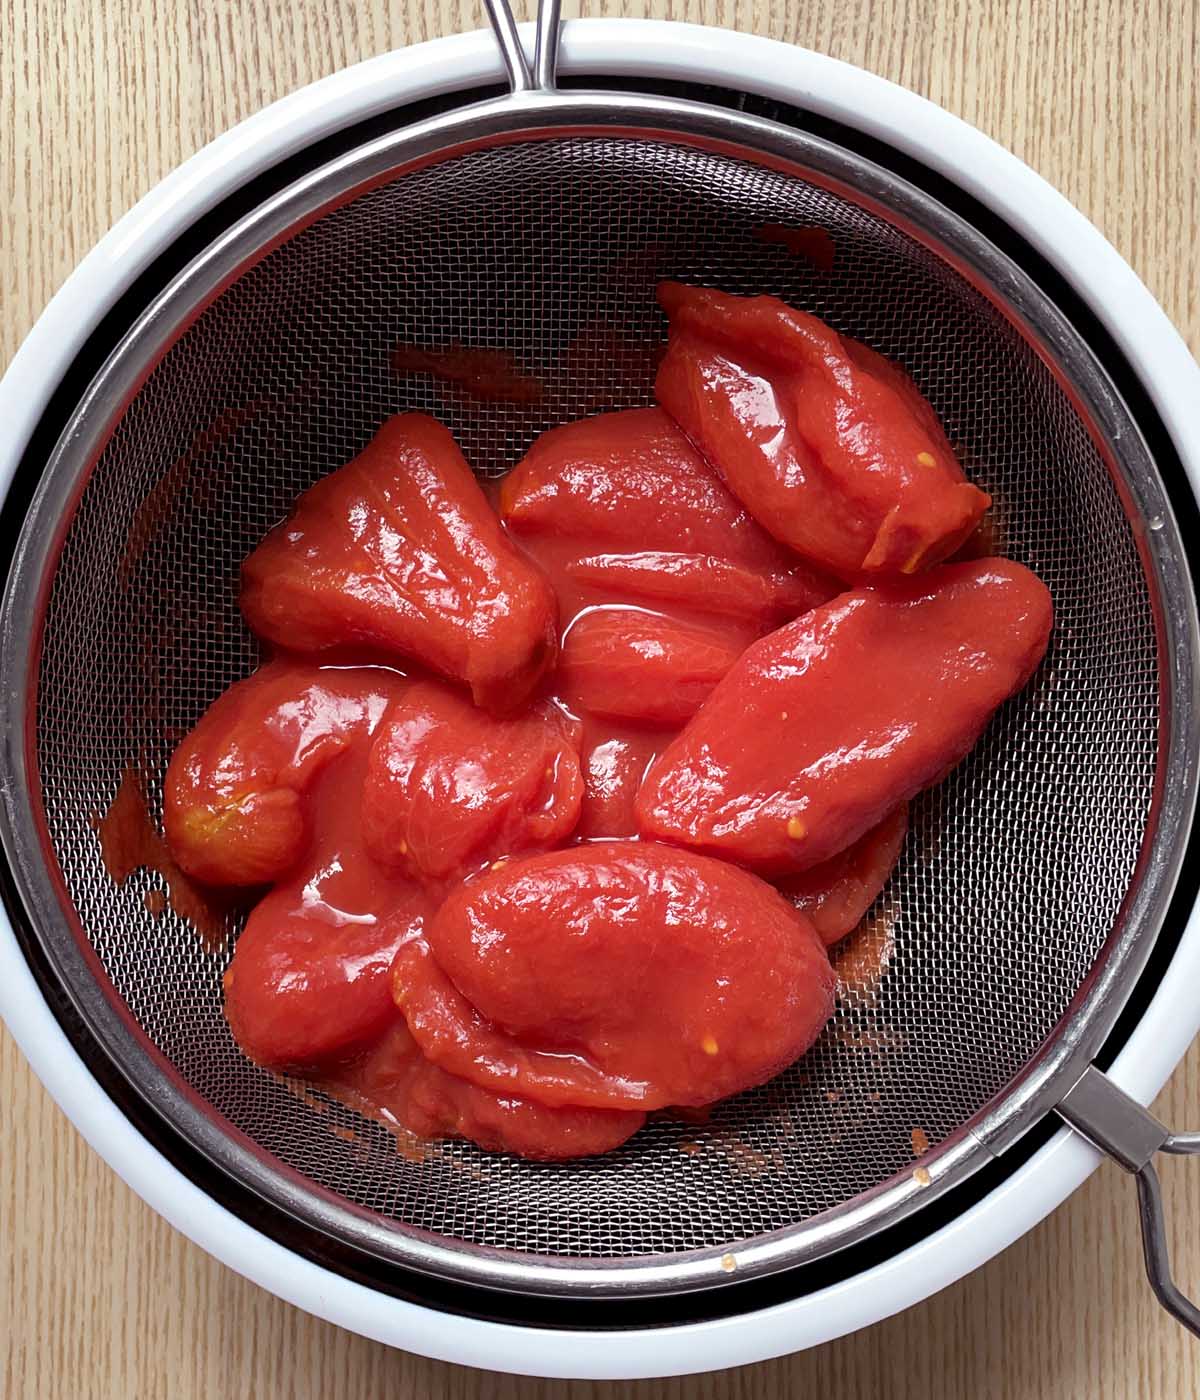 Red tomatoes in a strainer over a bowl.